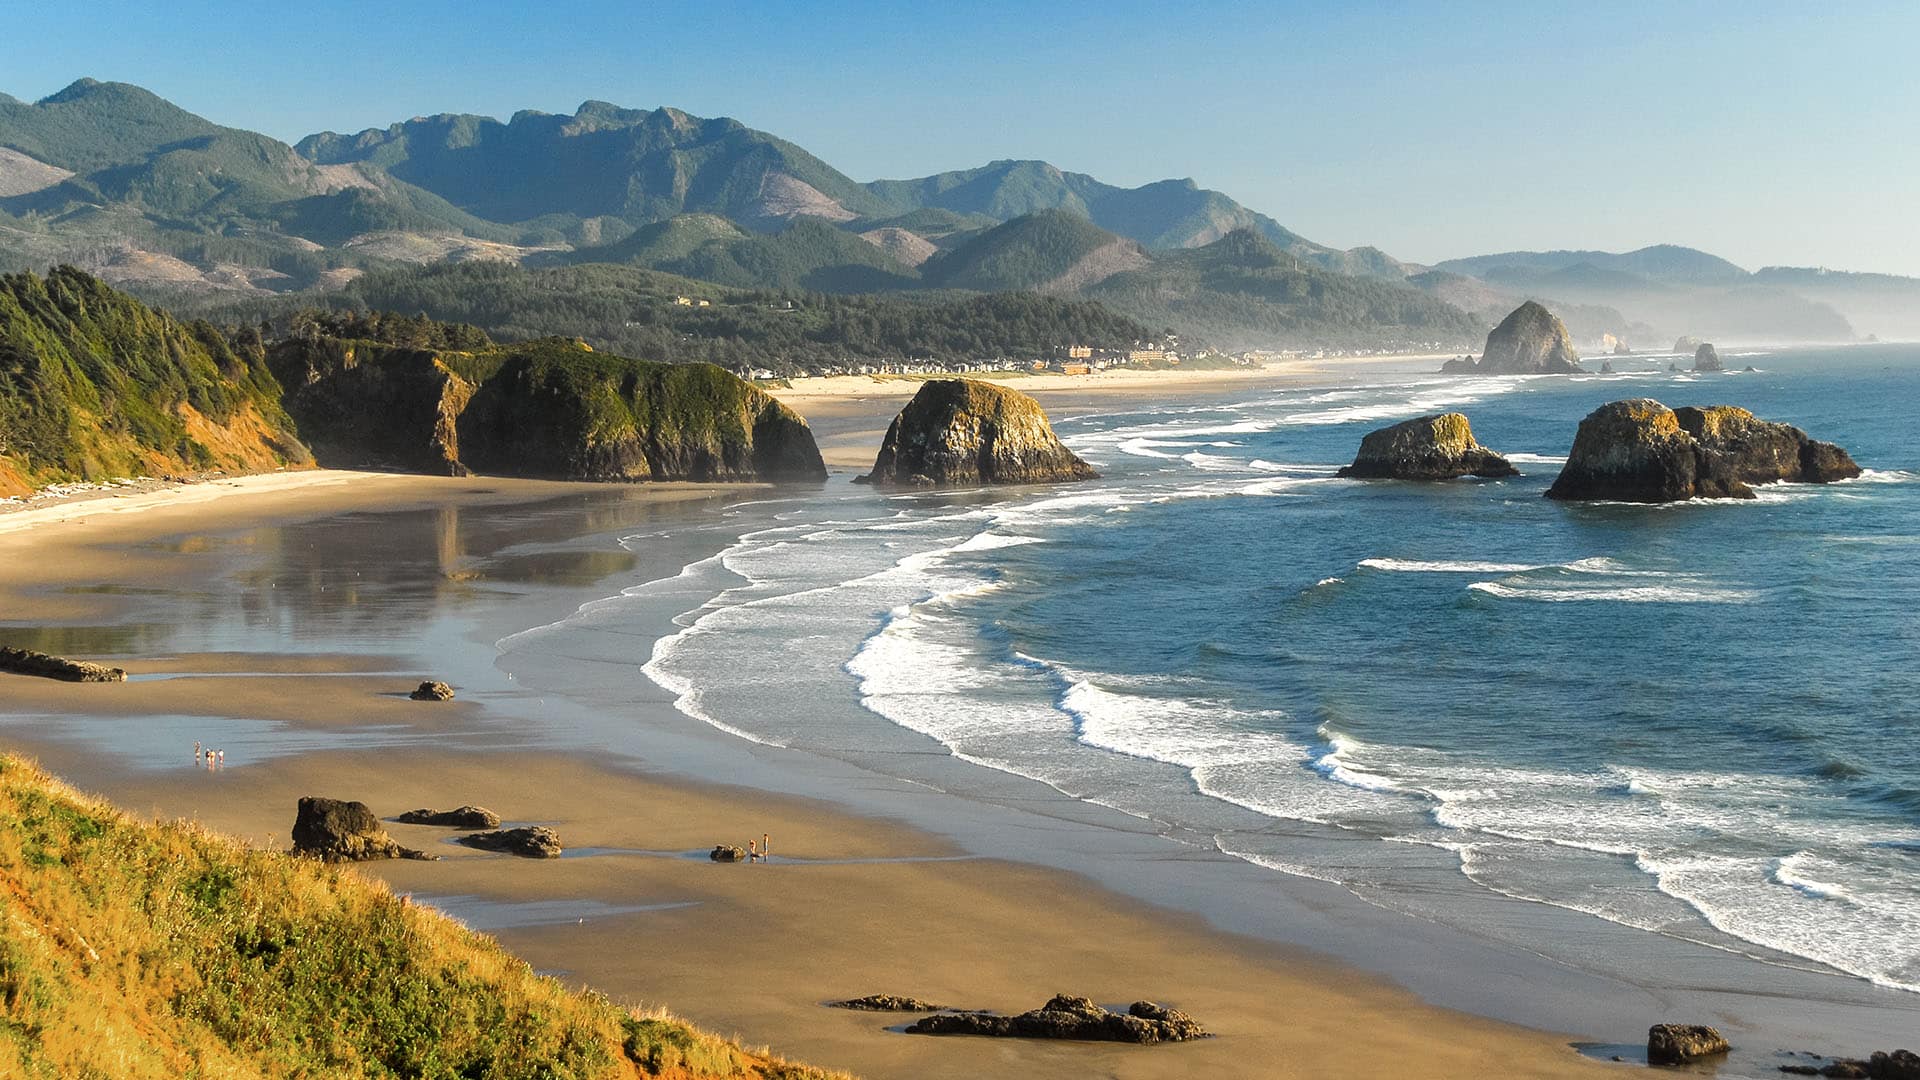 The shore of cannon beach and view of Haystack Rock.